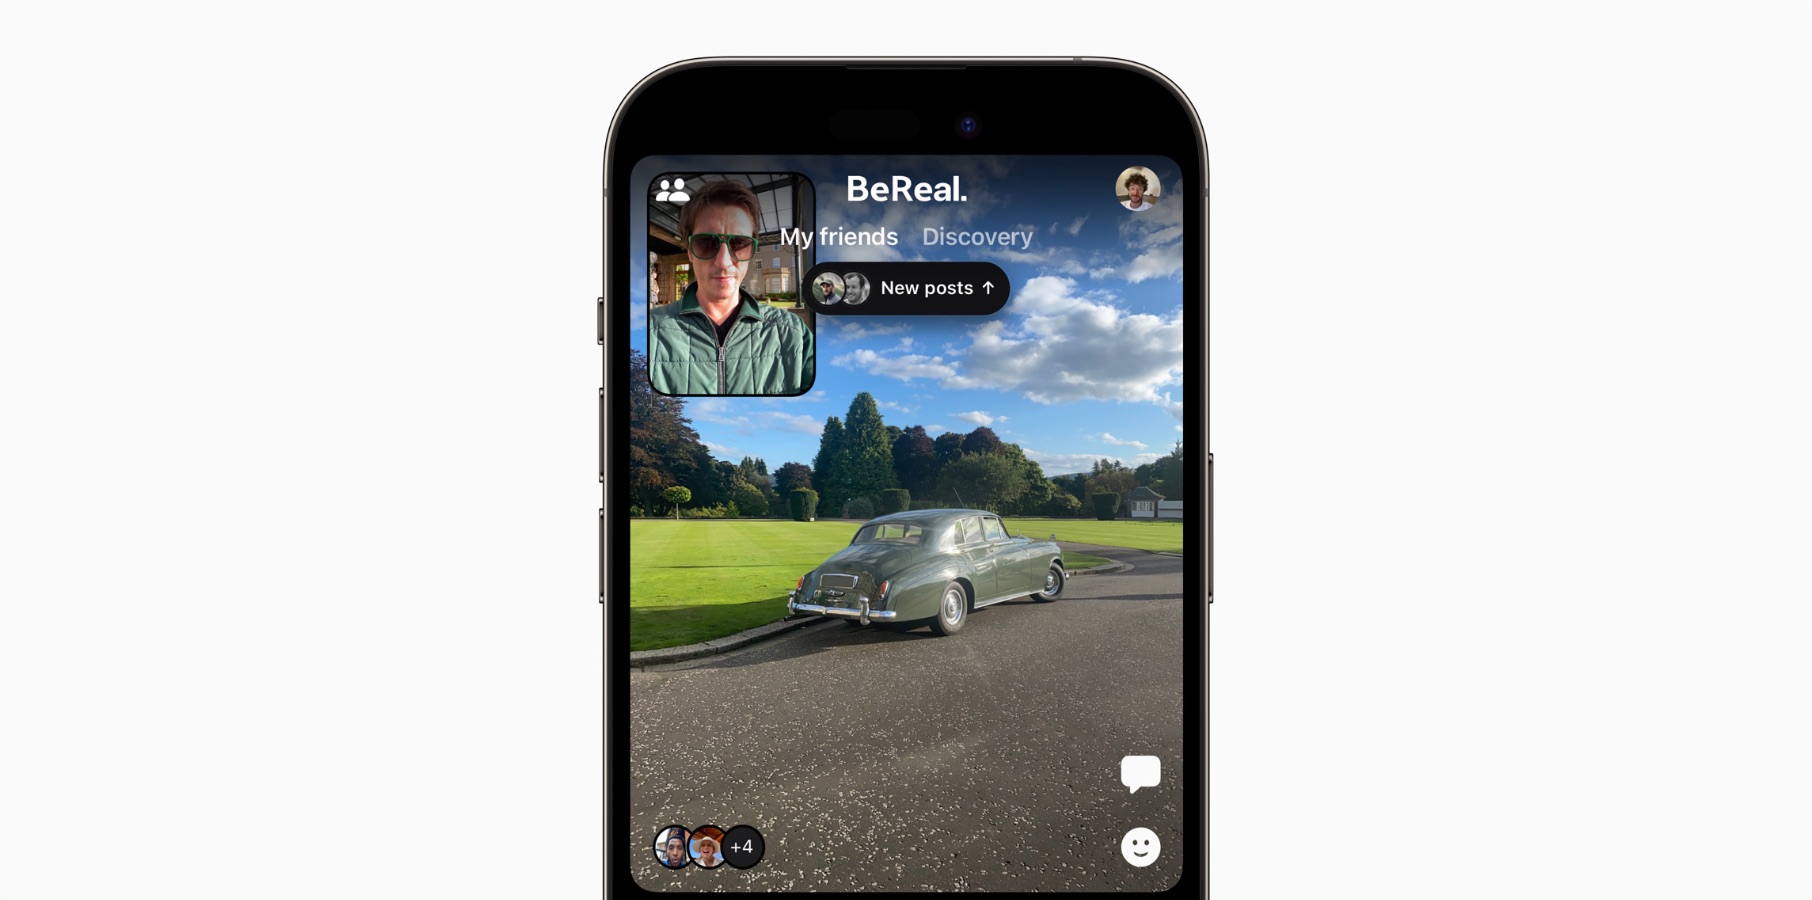 2022 App of the Year ‘BeReal’ is adding Spotify integration